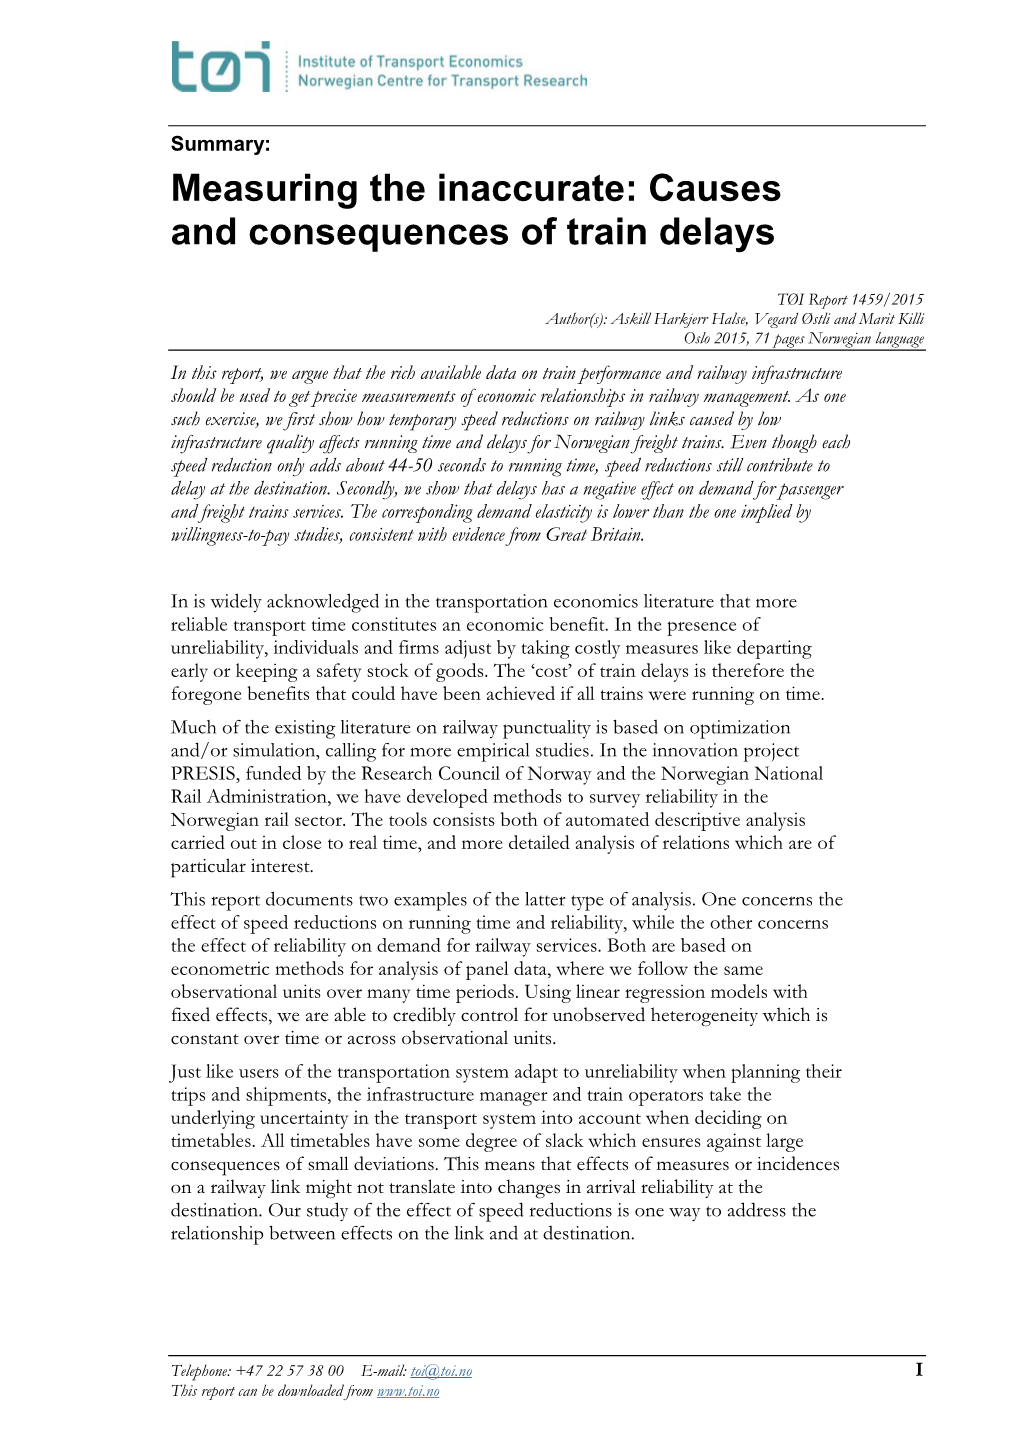 Measuring the Inaccurate: Causes and Consequences of Train Delays